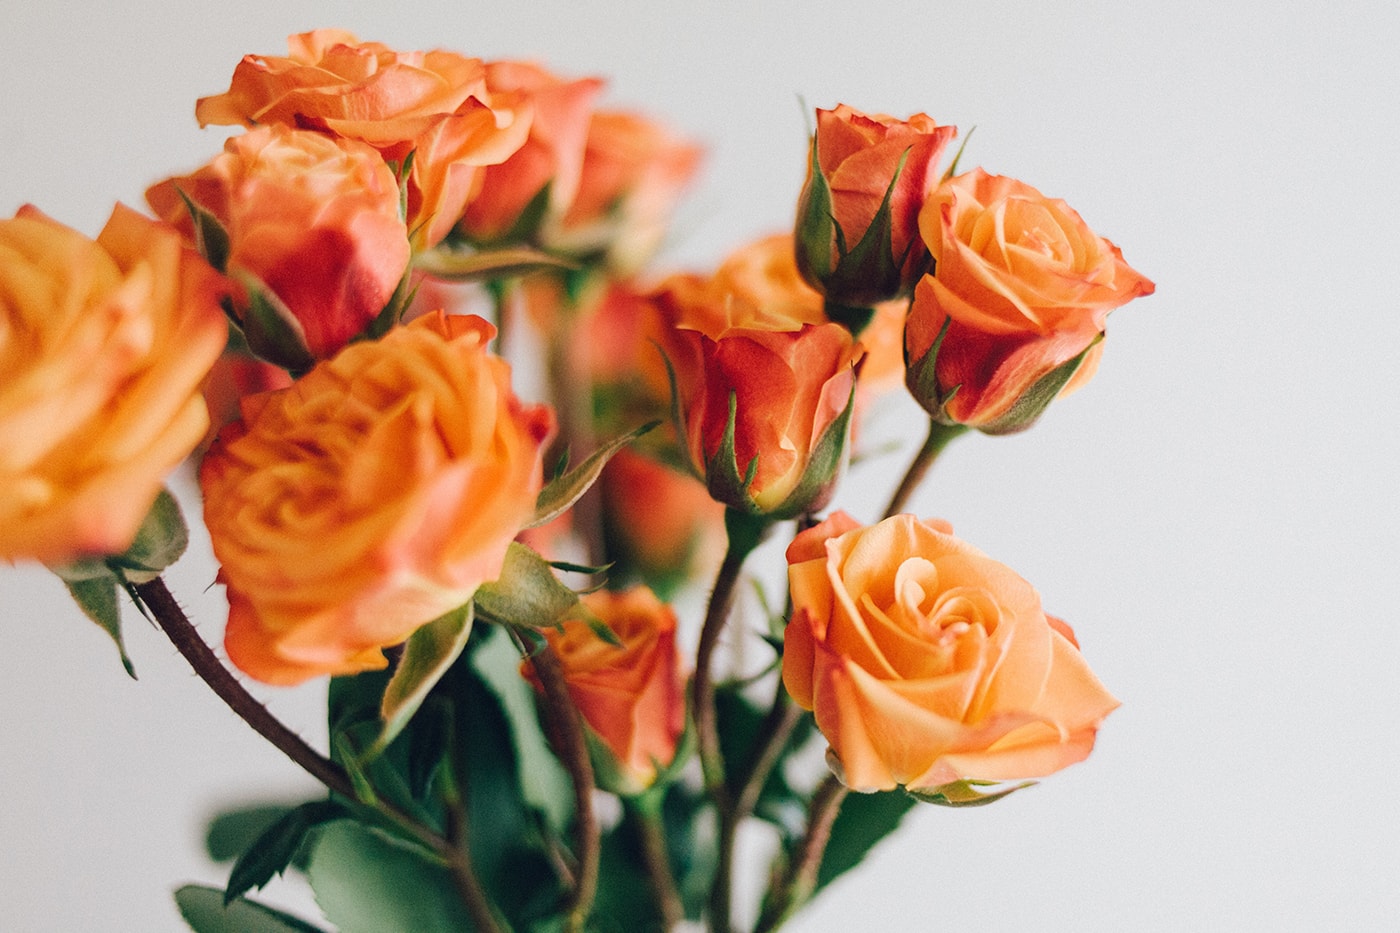 Rose Color Meanings - Orange Roses